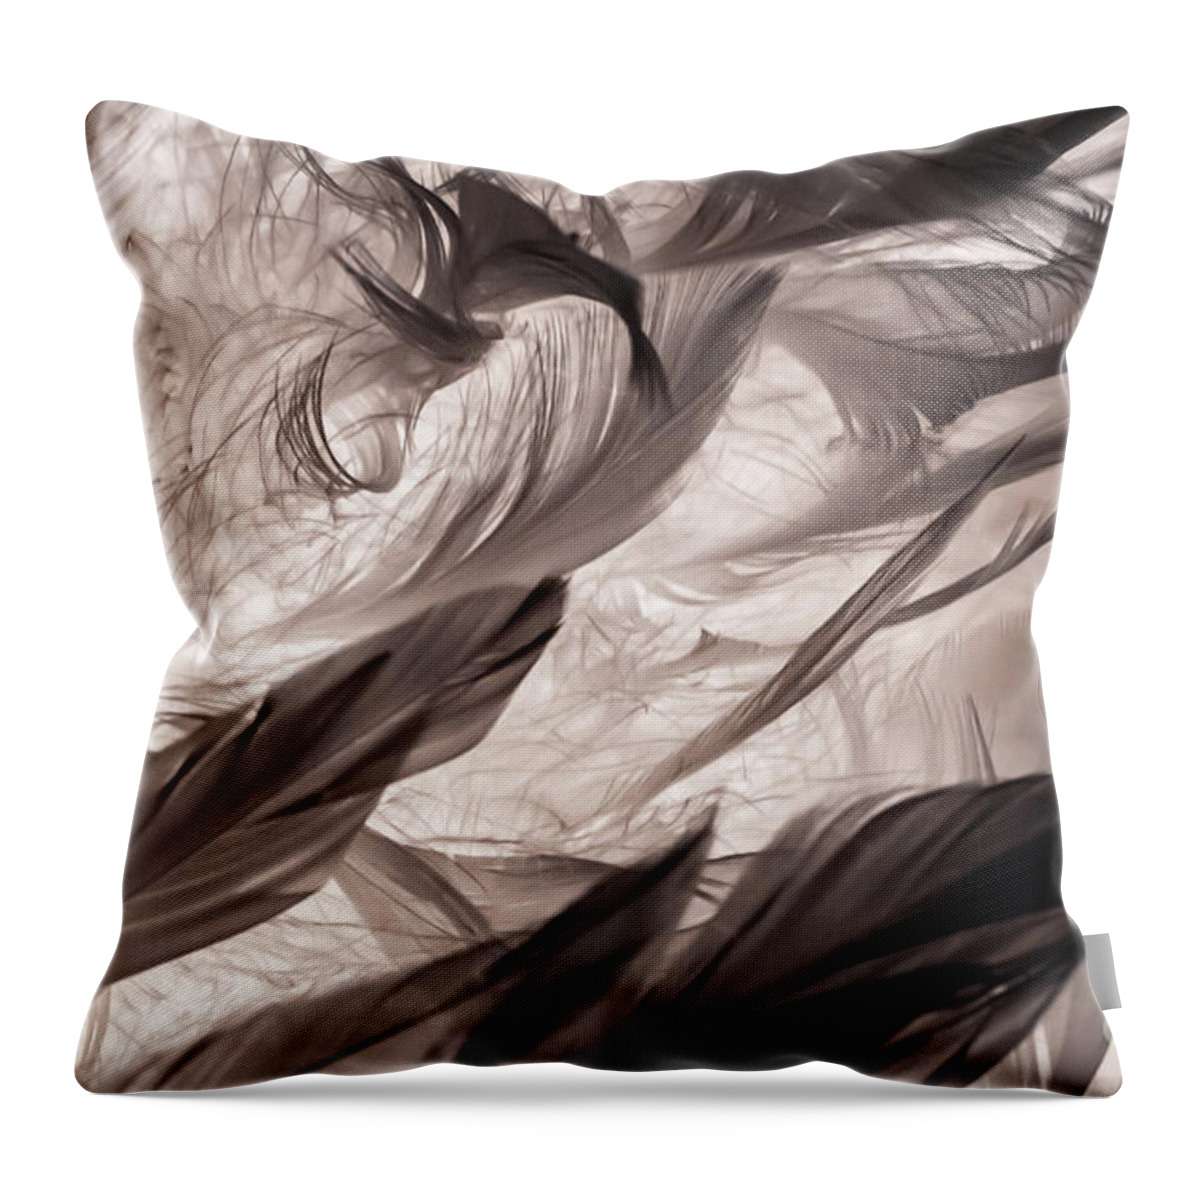 Feather Throw Pillow featuring the photograph Feathers by Lyl Dil Creations